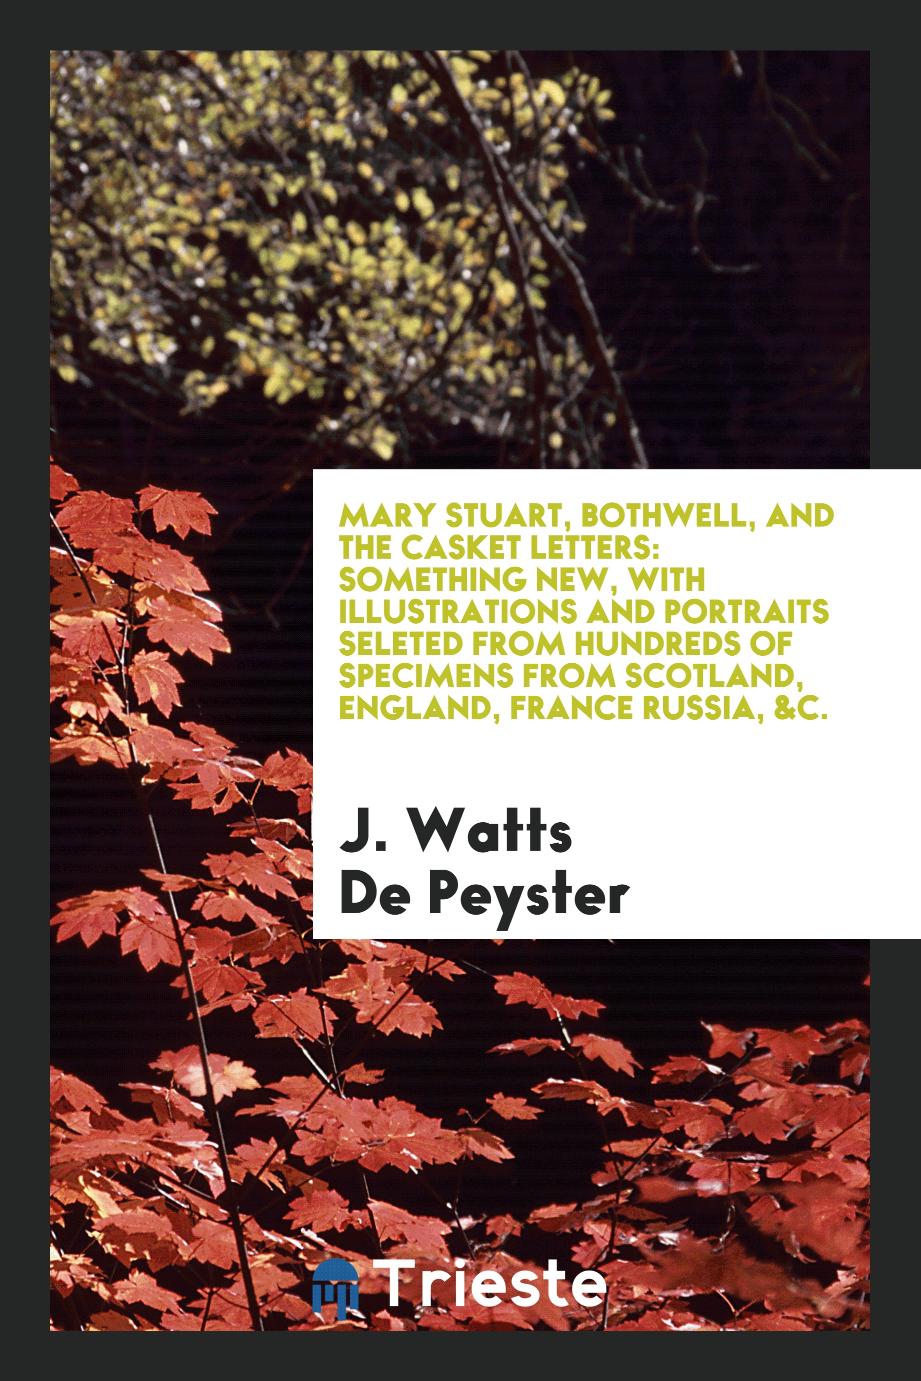 Mary Stuart, Bothwell, and The casket letters: something new, with illustrations and portraits seleted from hundreds of specimens from Scotland, England, France Russia, &c.